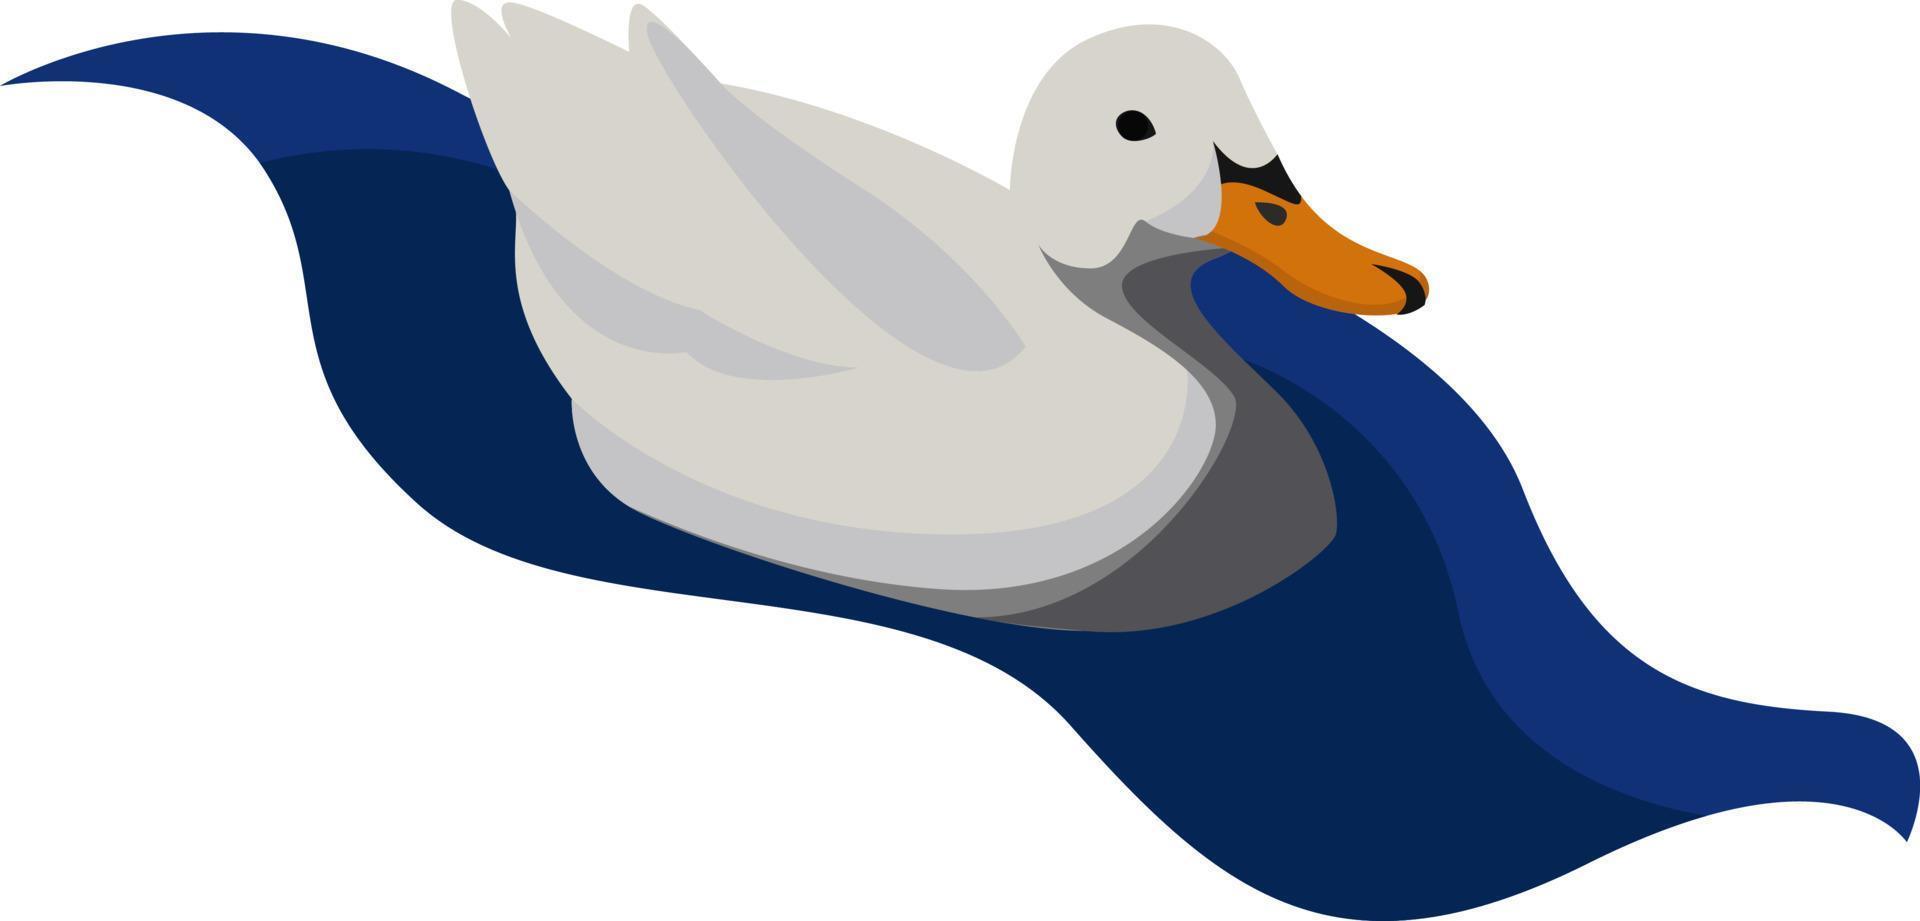 White duck in water, illustration, vector on white background